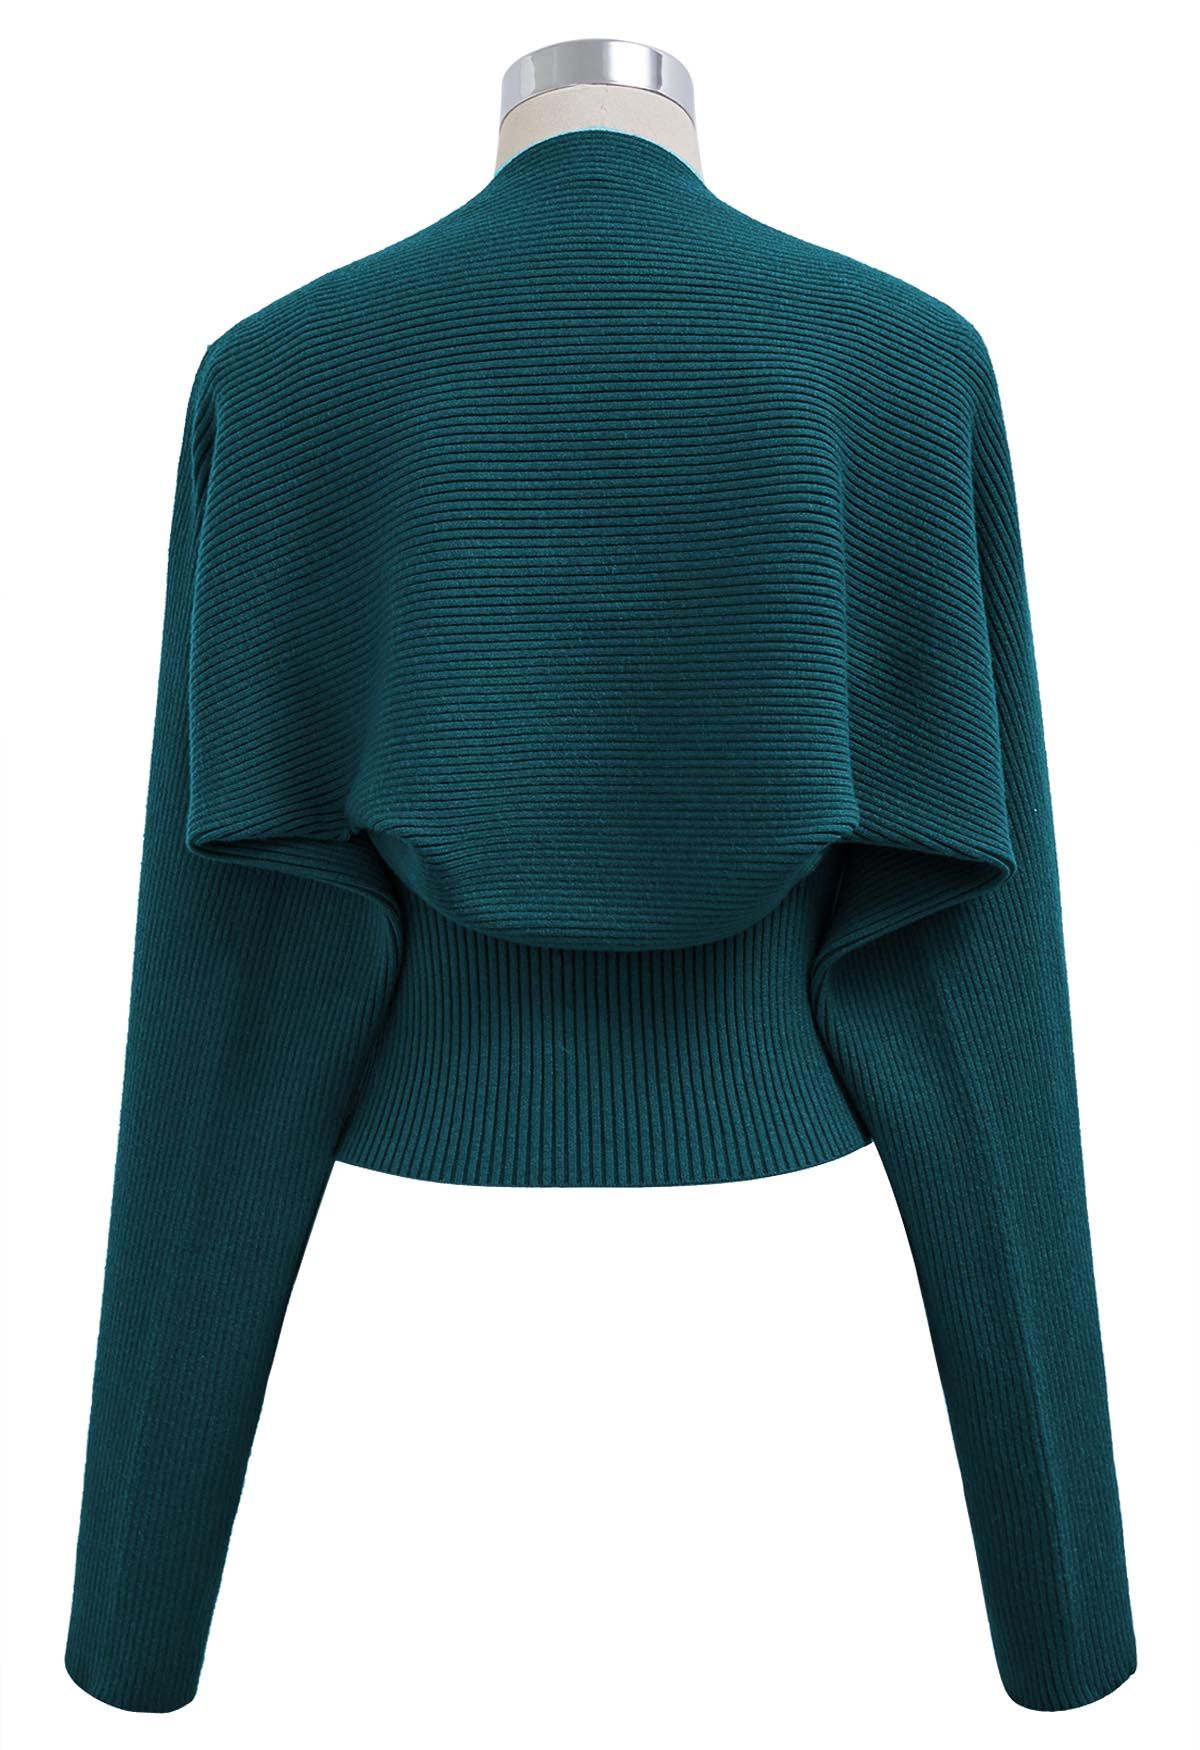 Feather Trim Cami Top and Sweater Sleeve Set in Teal